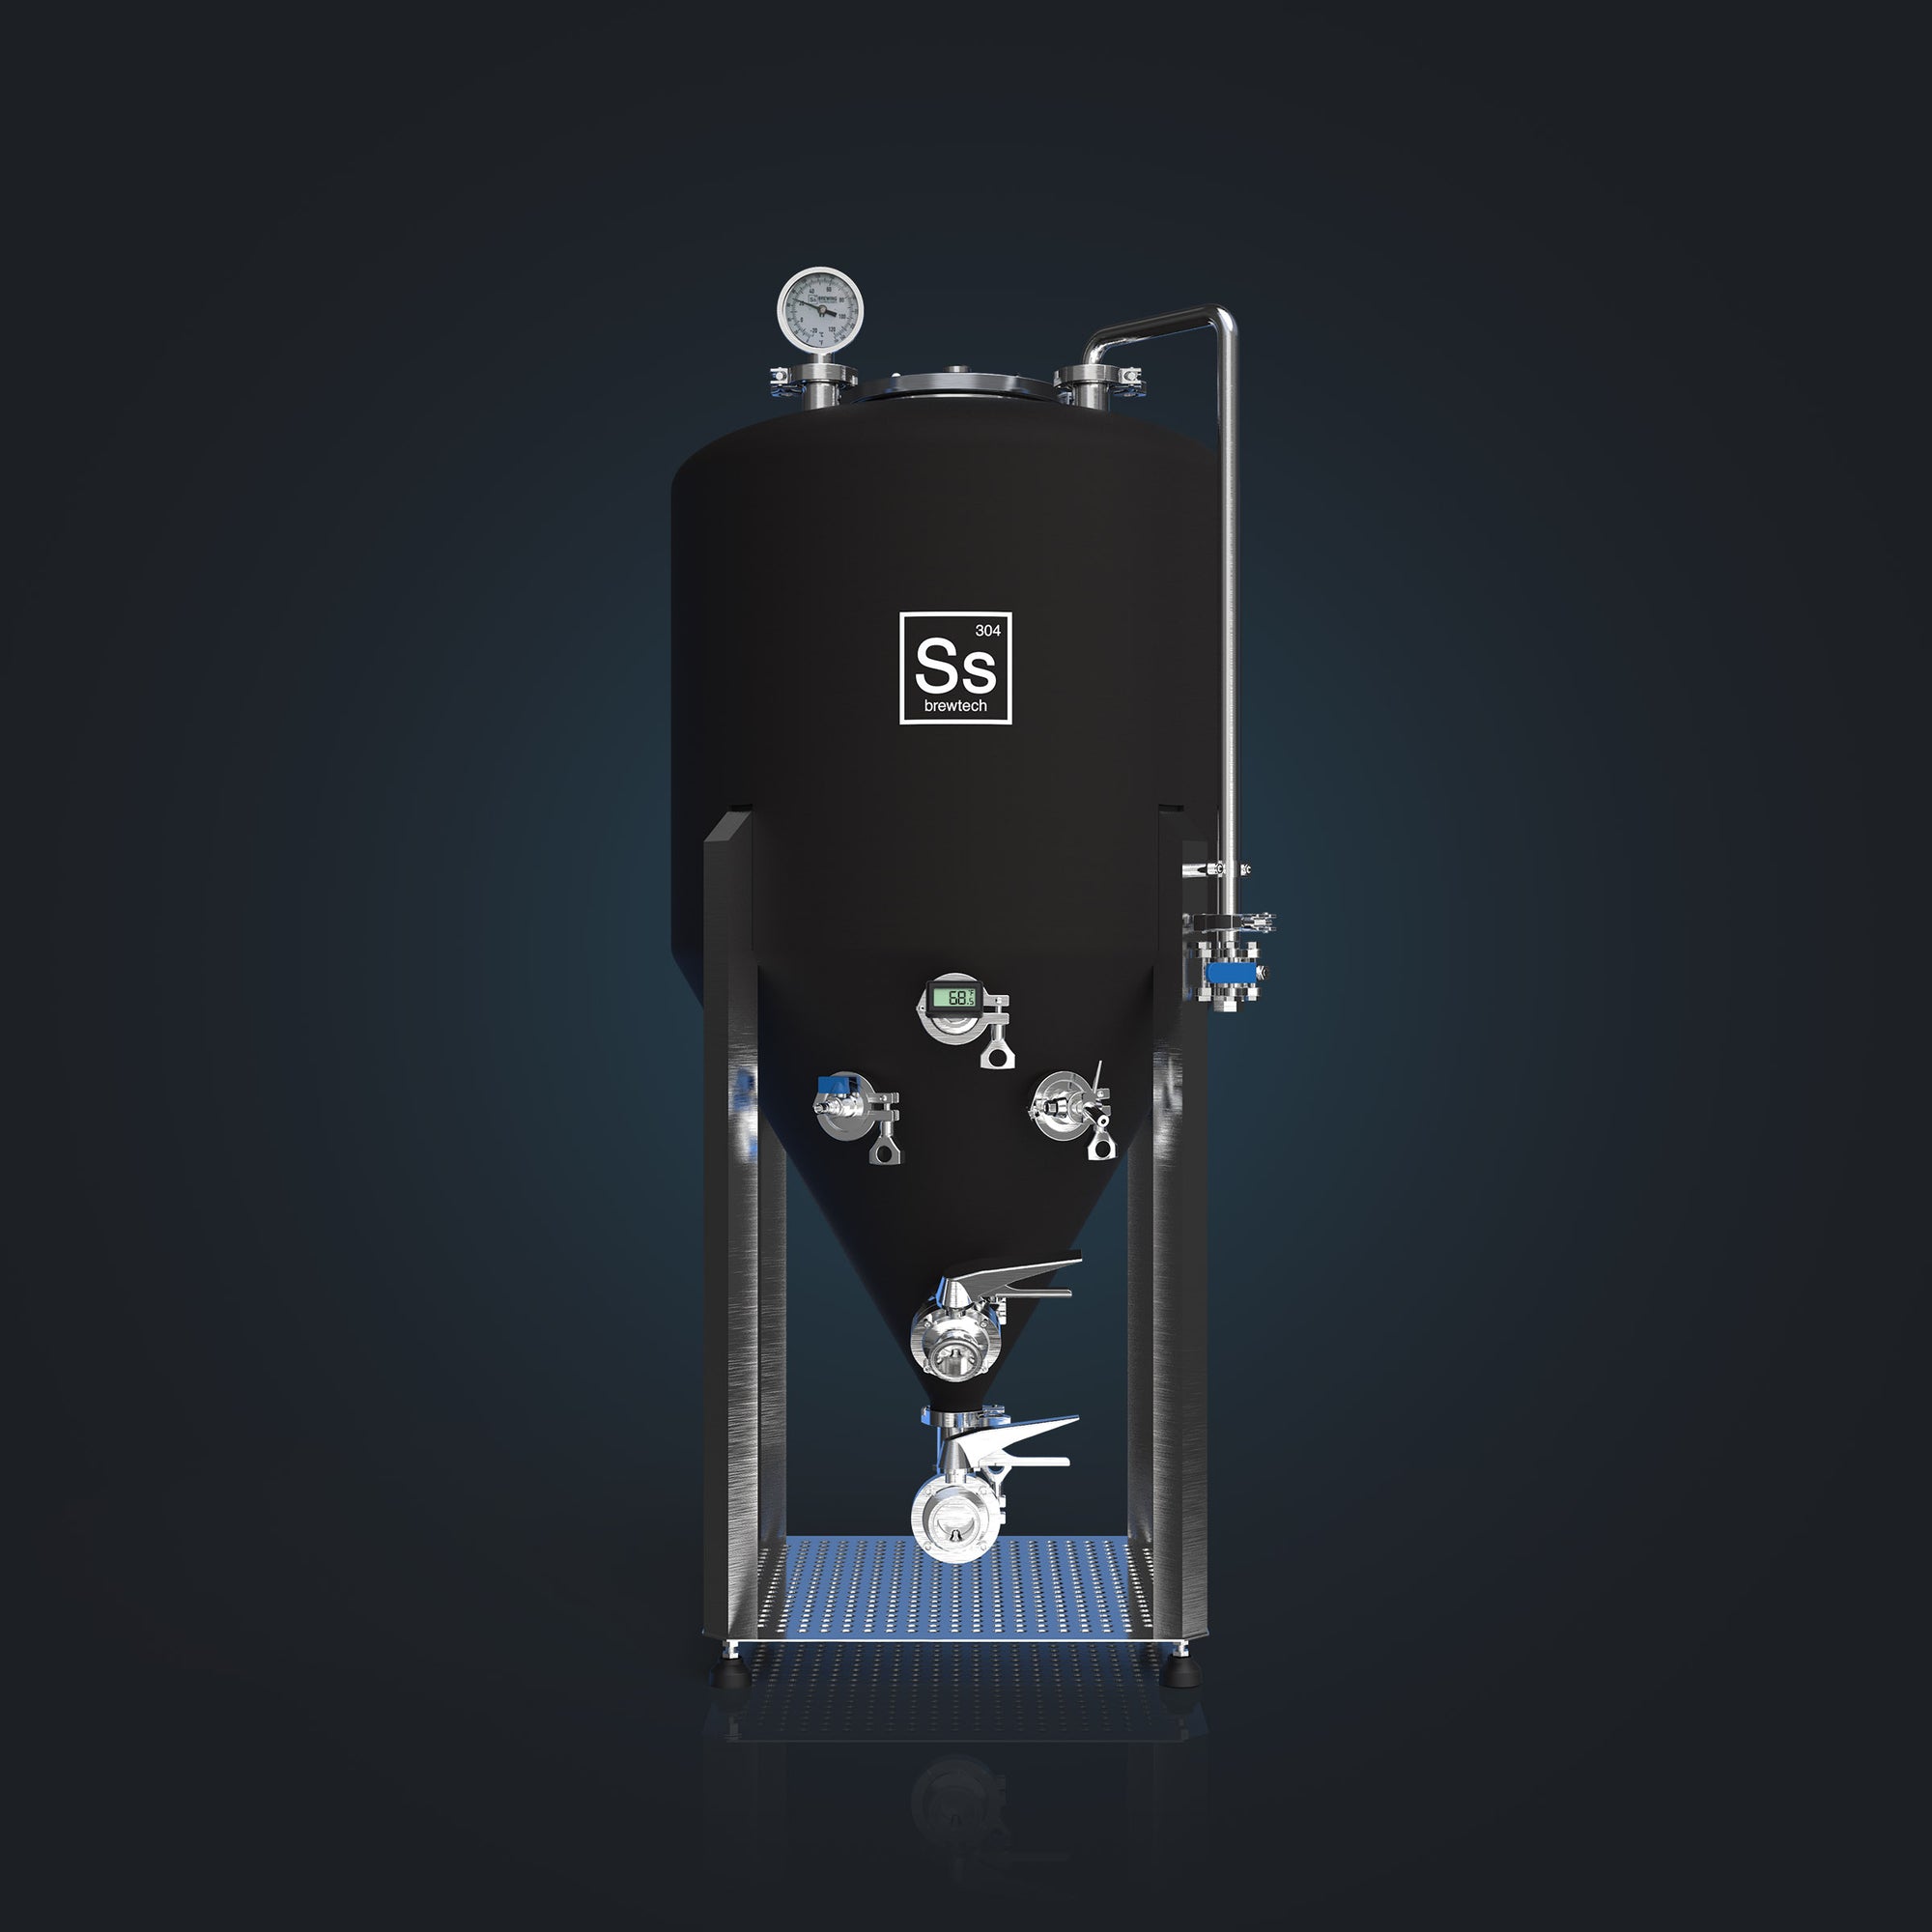 Pressurizable fermentation available to the home and nano brewer with the Ss Brewtech Unitank